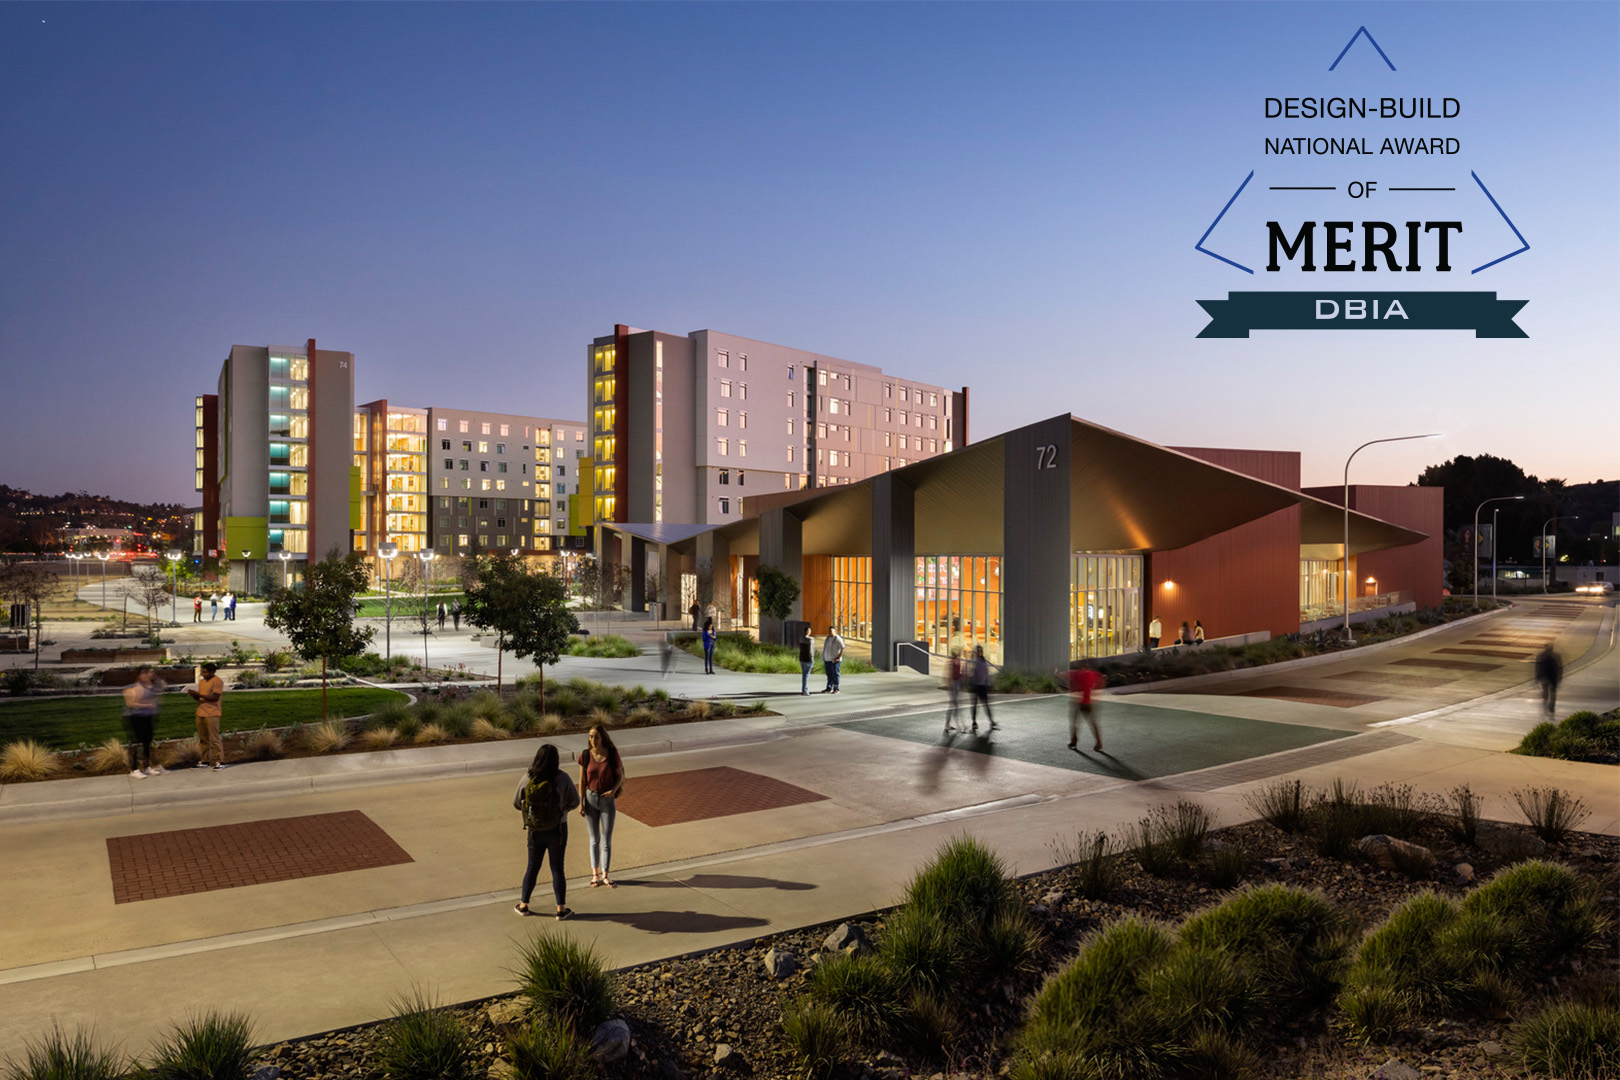 Cal Poly Pomona Student Housing and Dining Commons Wins DBIA National